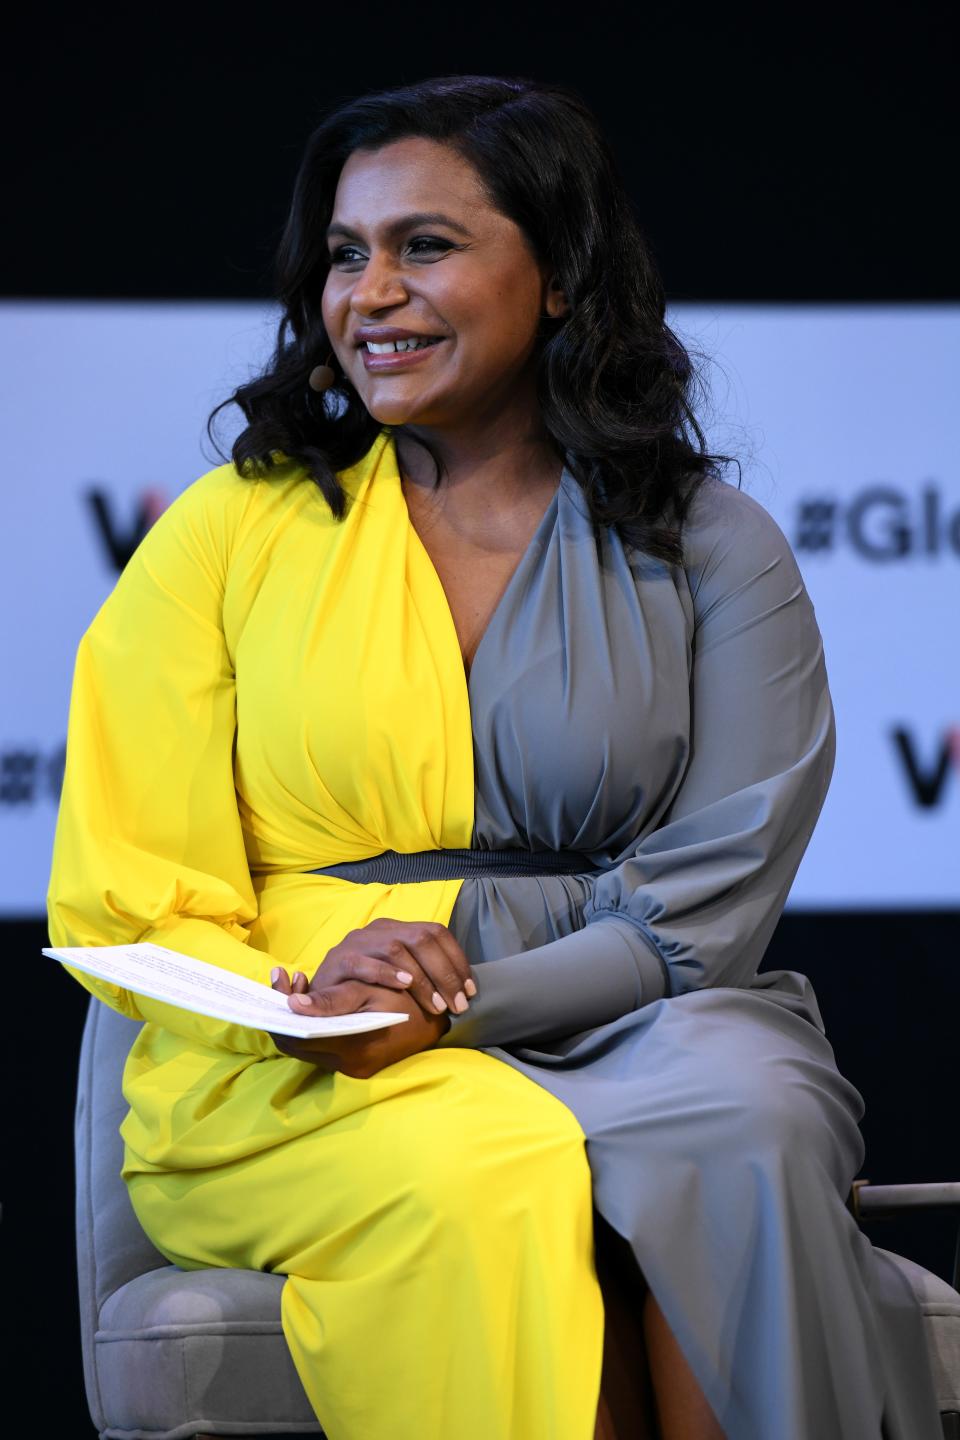 At Glamour's 2018 Women of the Year Awards, Mindy Kaling, Hoda Kotb, and Savannah Guthrie talked about how to show girls what's next.